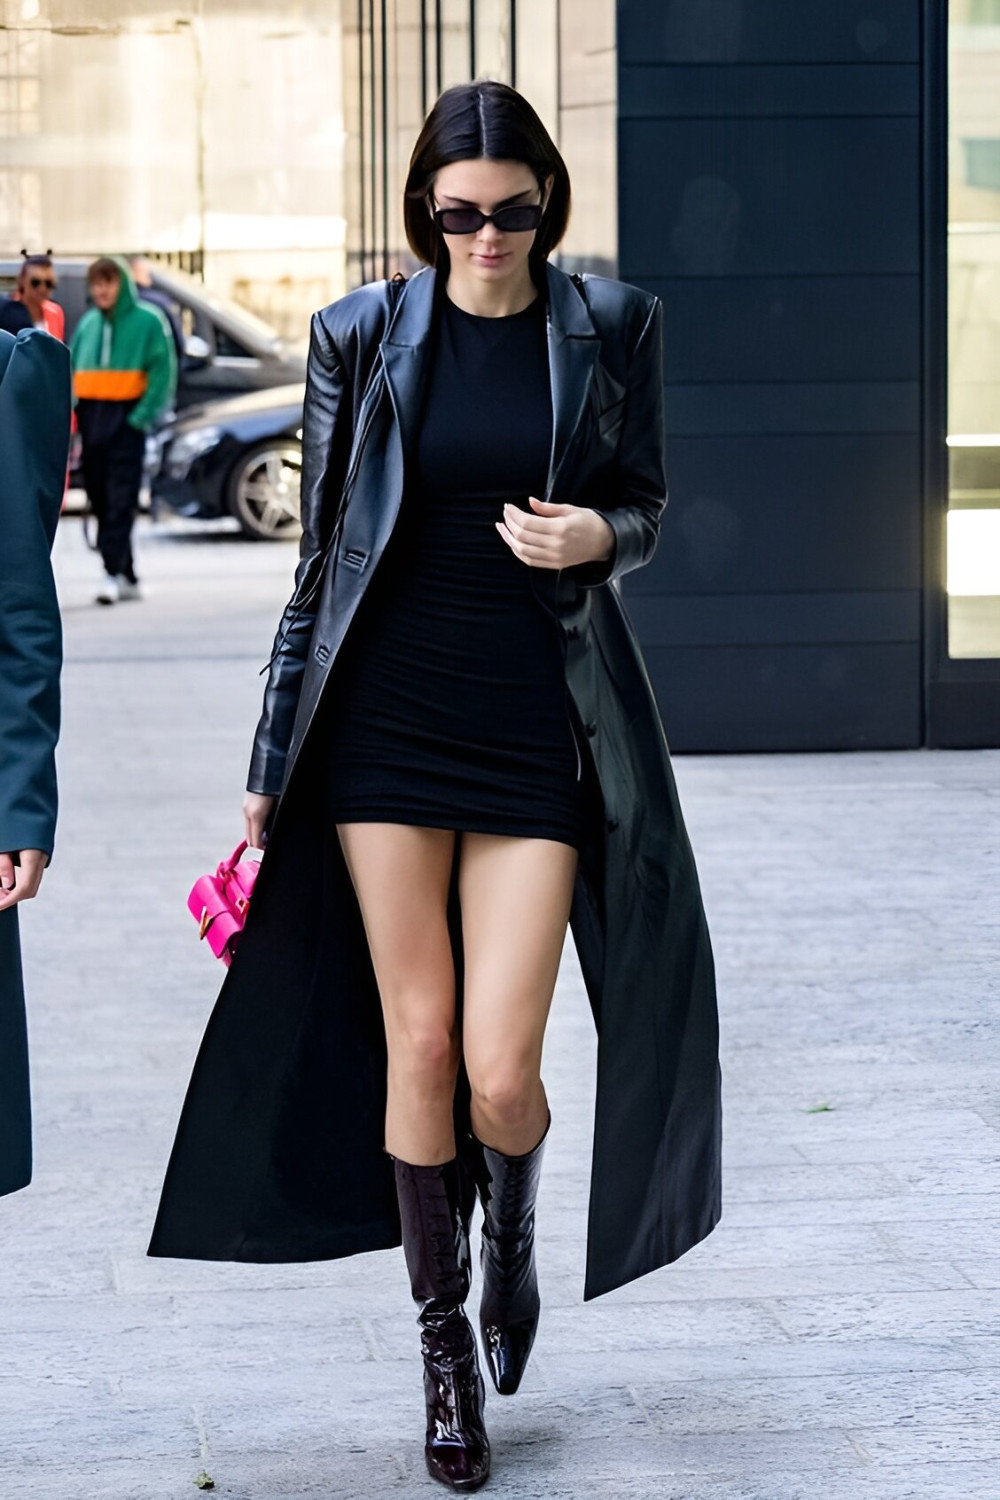 27 Breathtaking Little Black Dress Outfits For Stylish Girls - 191